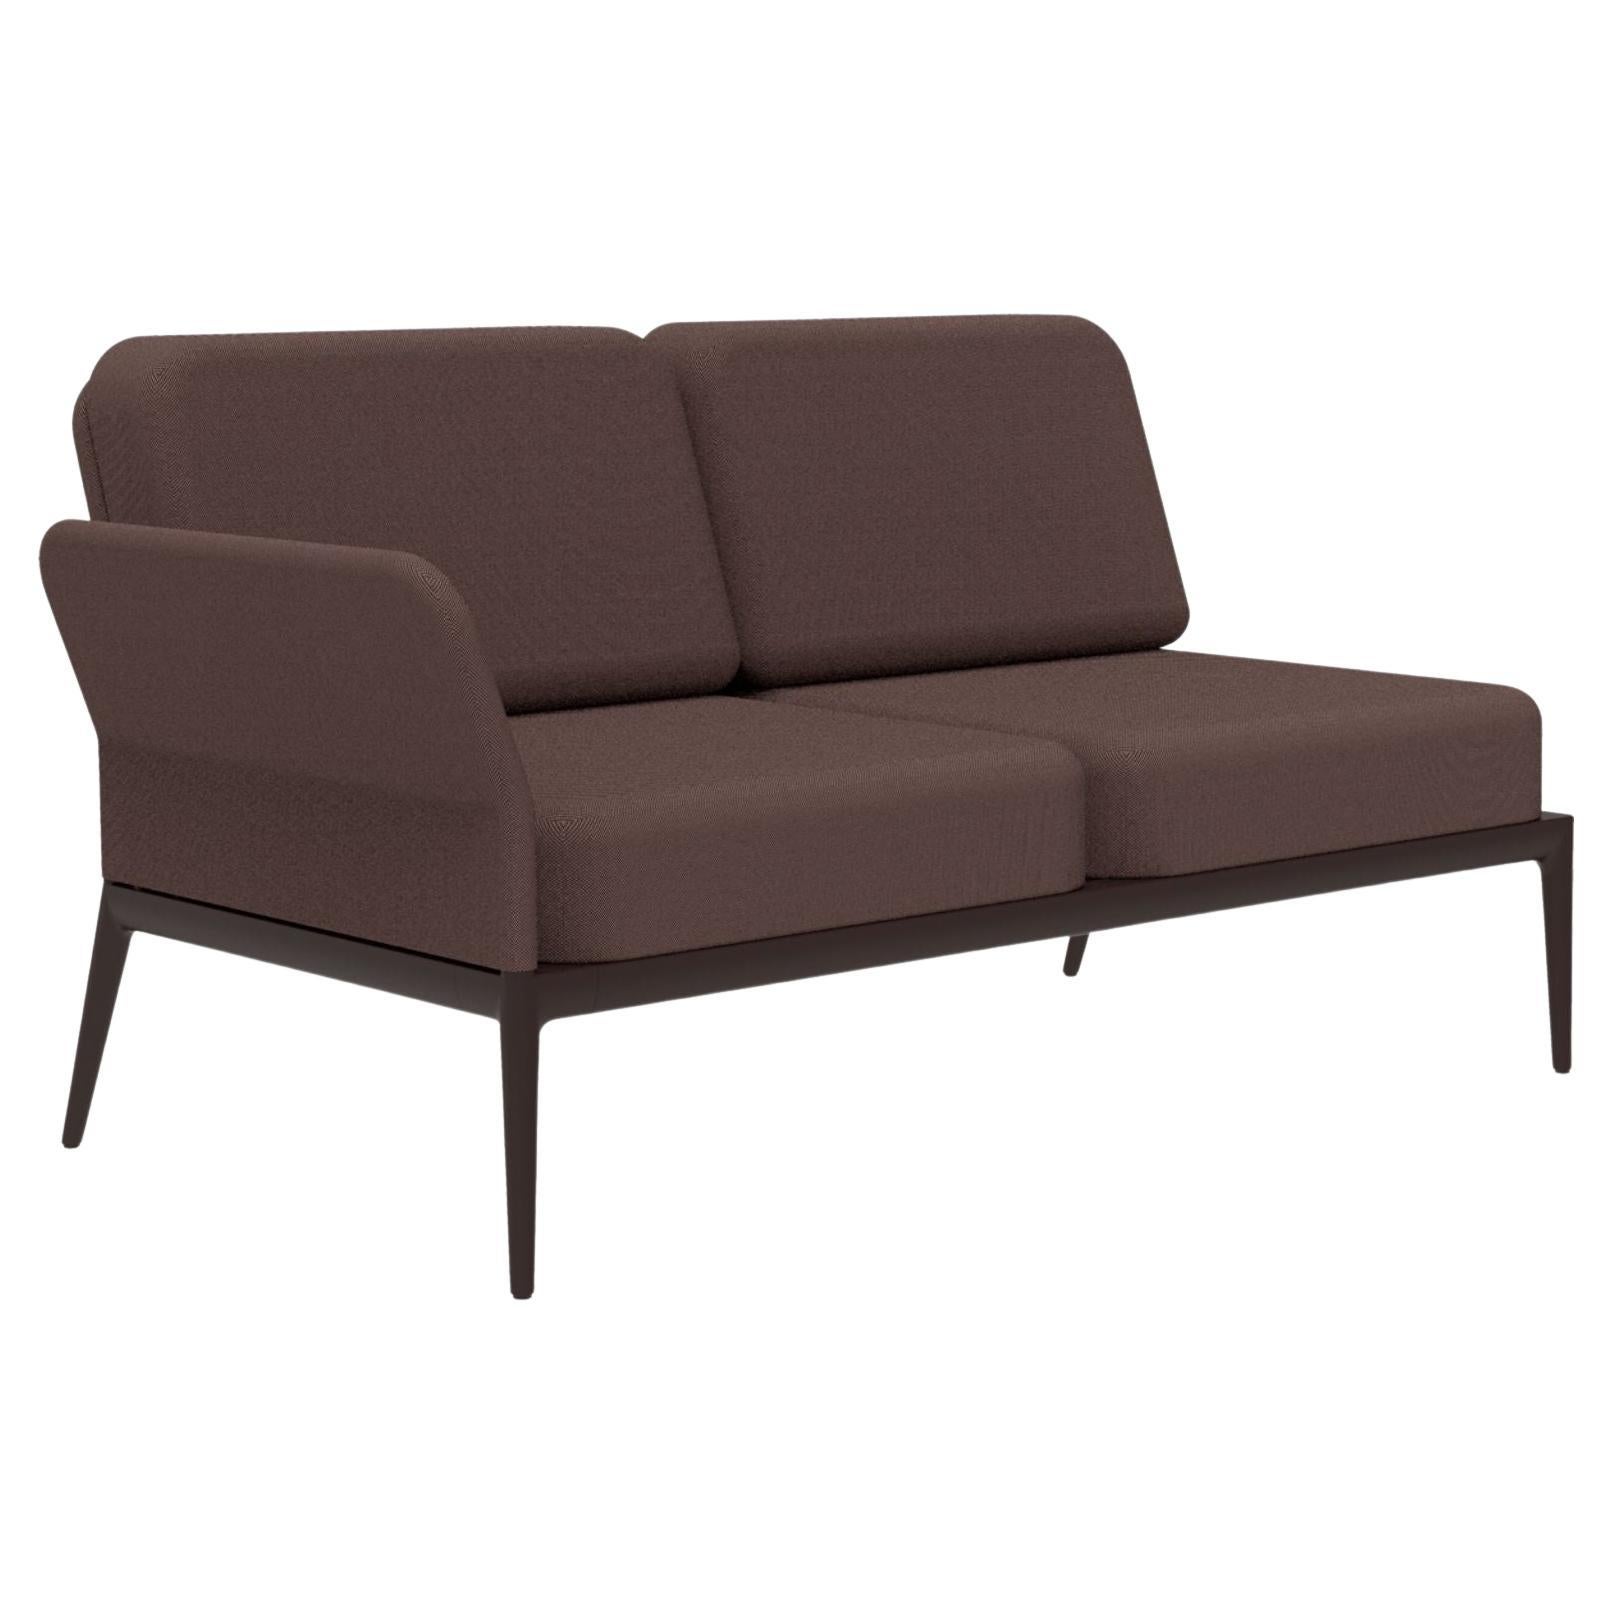 Cover Chocolate Double Right Modular Sofa by MOWEE